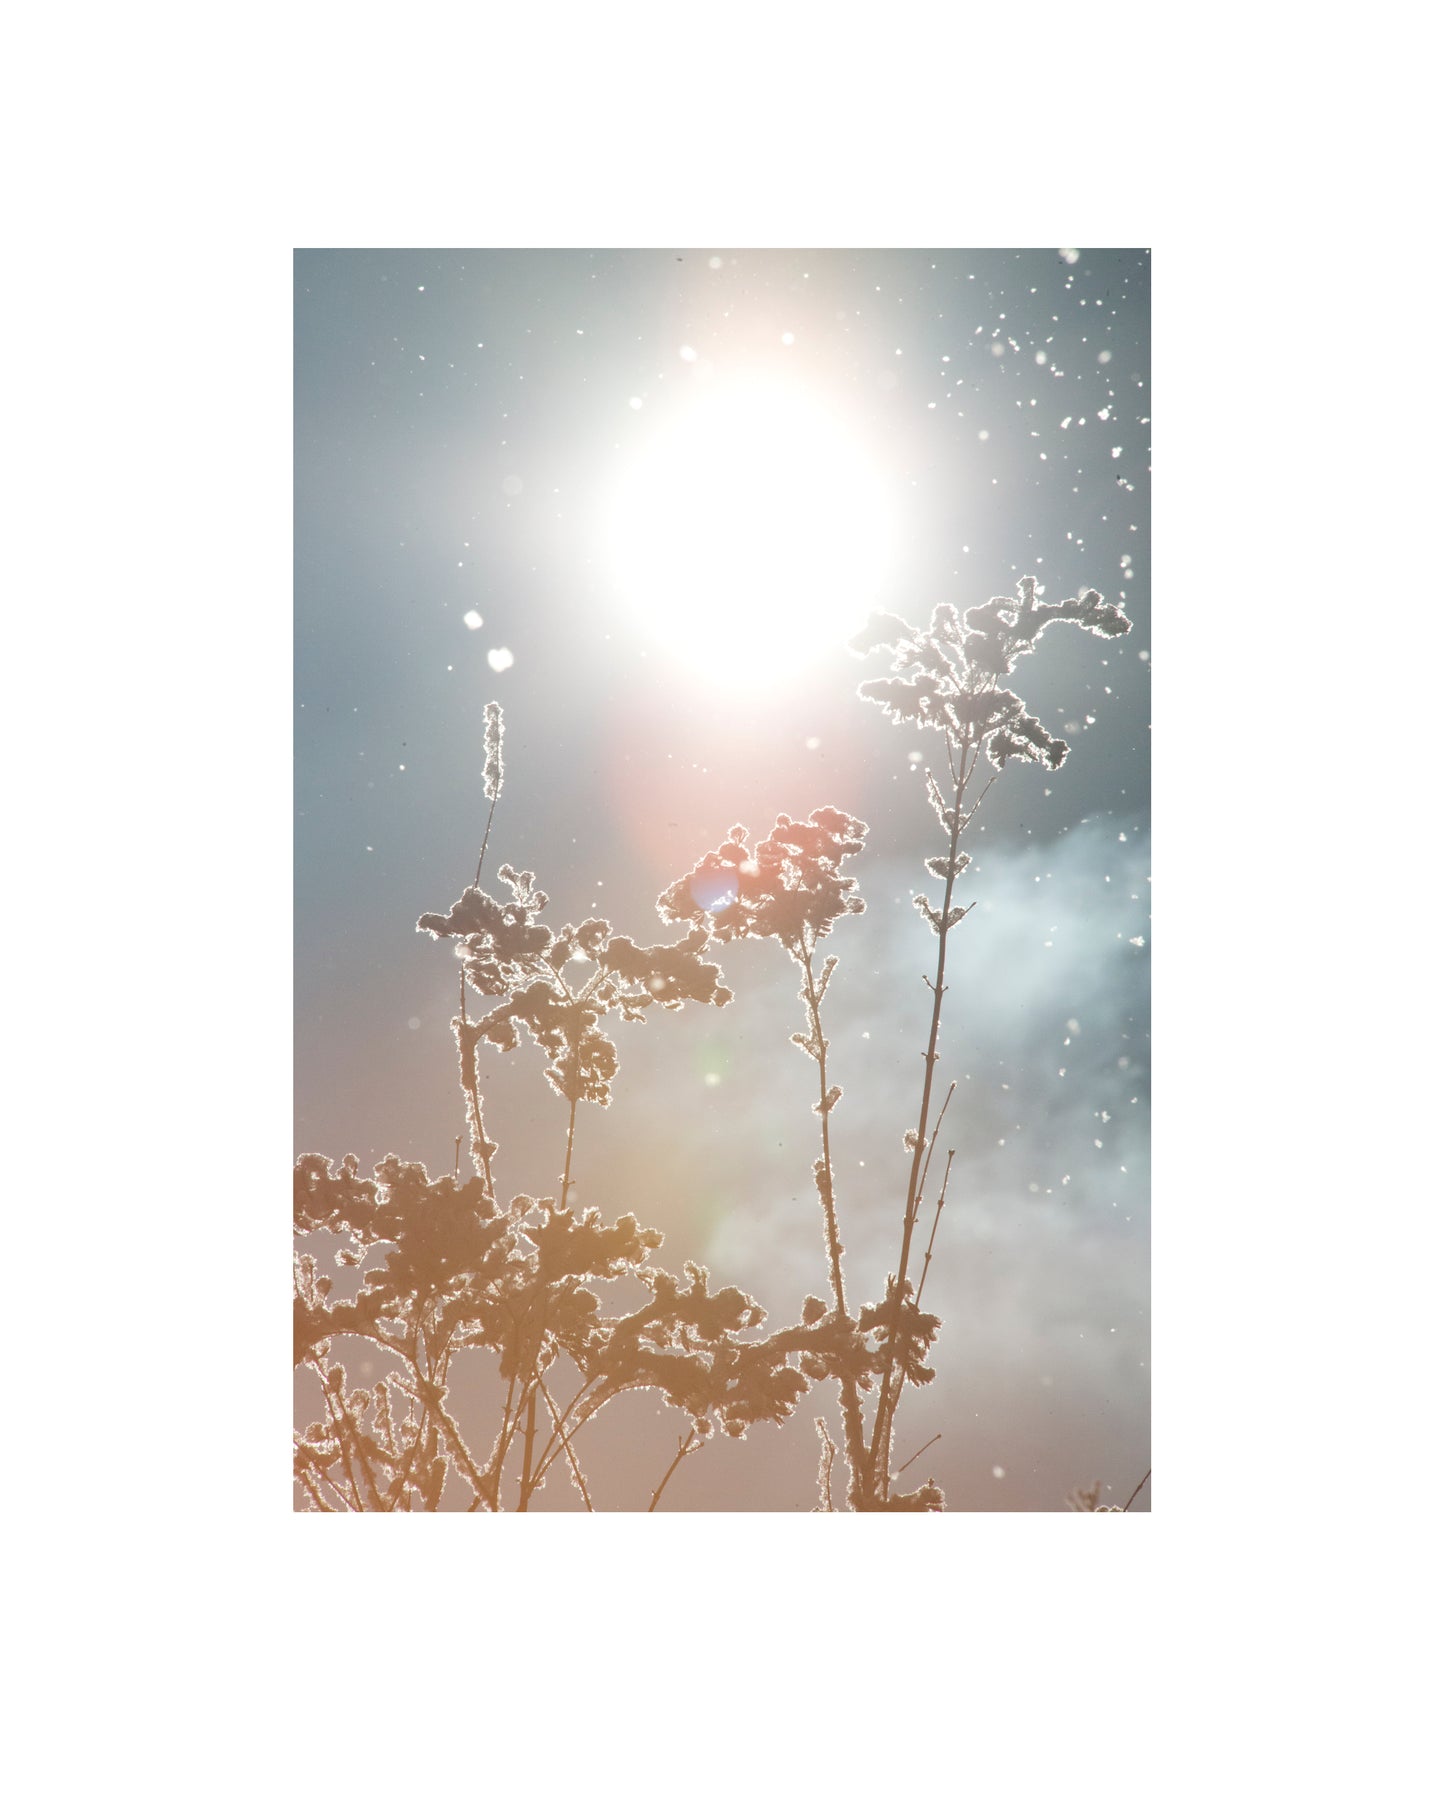 Photograph of winter plants and sun